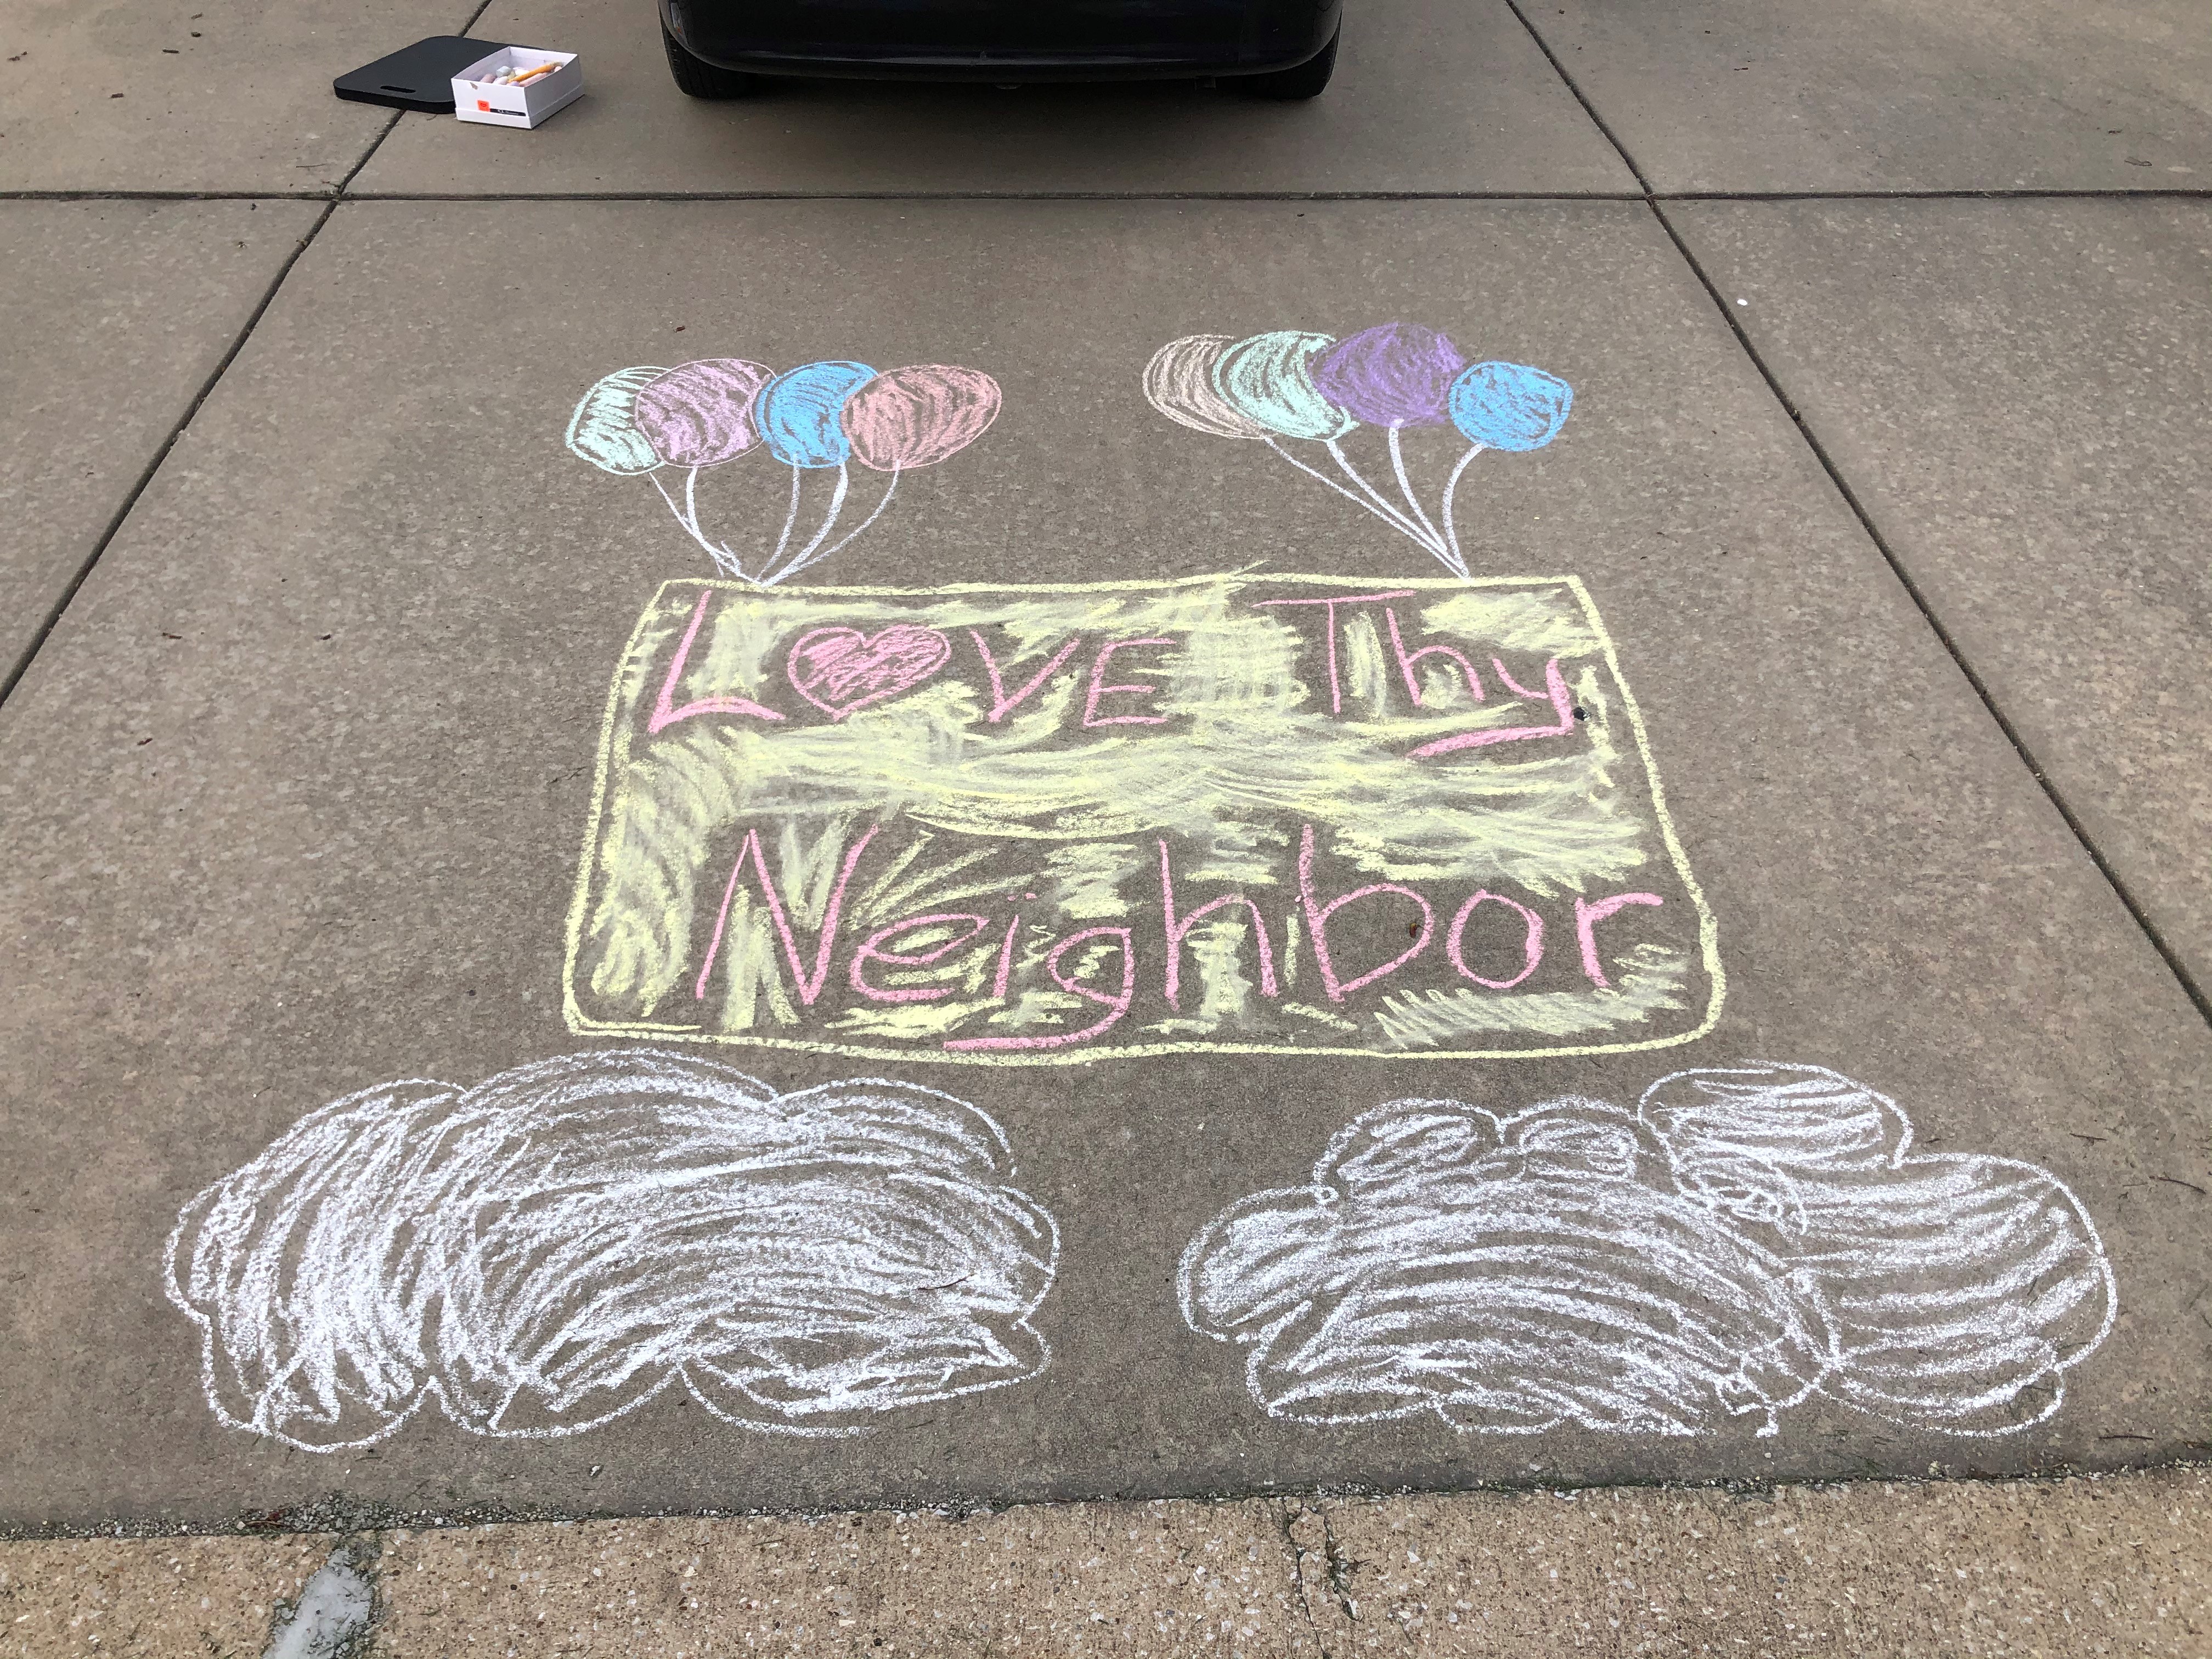 Neighborhood Art Can Spread Kindness And Joy In A Community To Combat Isolation And Loneliness Mu Extension